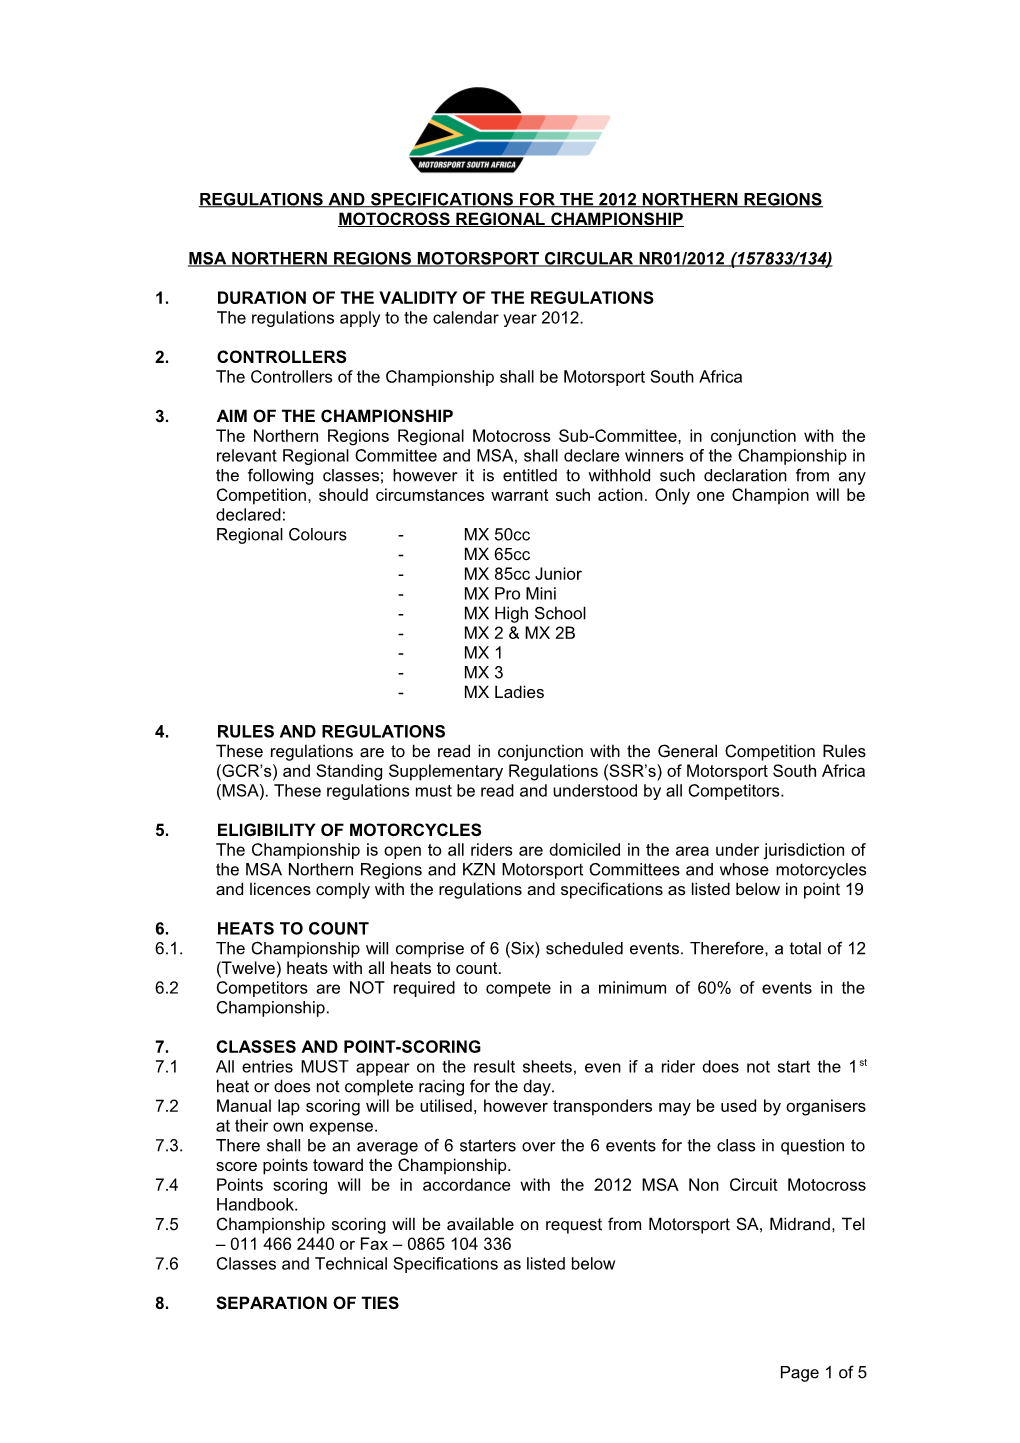 Regulations and Specifications for the 2005 Northern Regions Formula Libre Club Championship